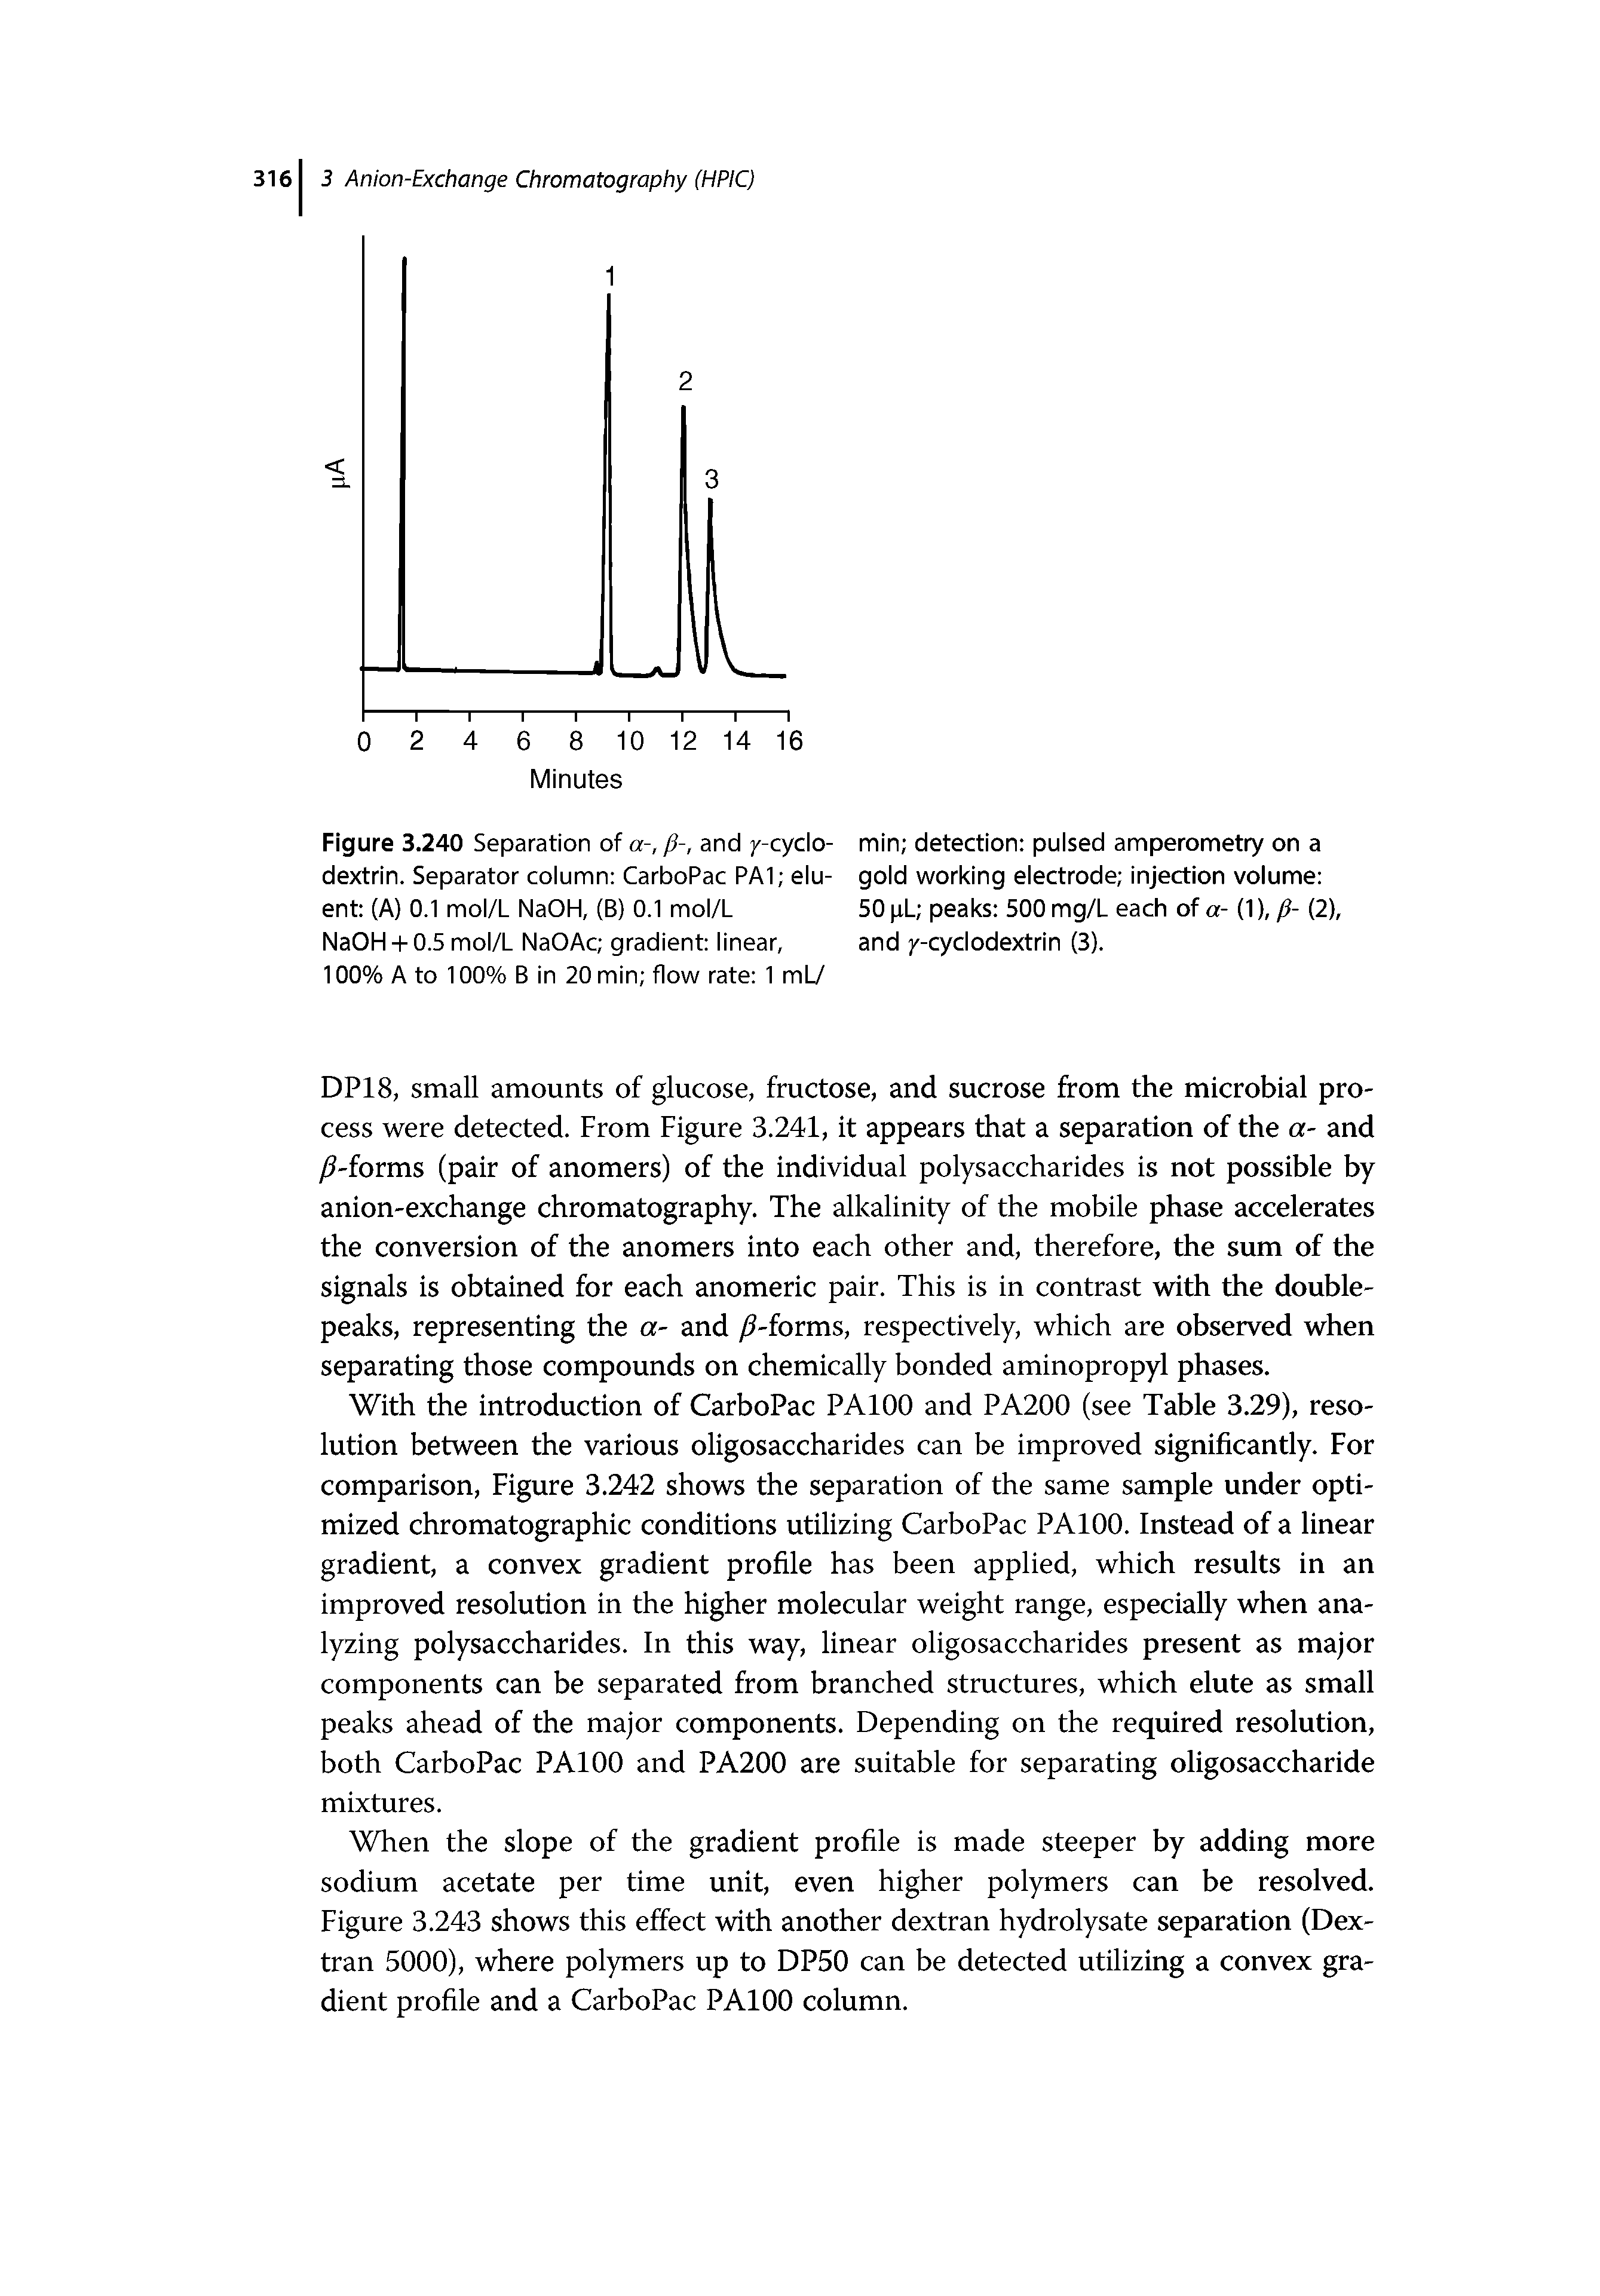 Figure 3.240 Separation of a-, fi-, and /-cyclodextrin. Separator column CarboPac PA1 eluent (A) 0.1 mol/L NaOH, (B) 0.1 mol/L NaOH-l-0.5 mol/L NaOAc gradient linear,...